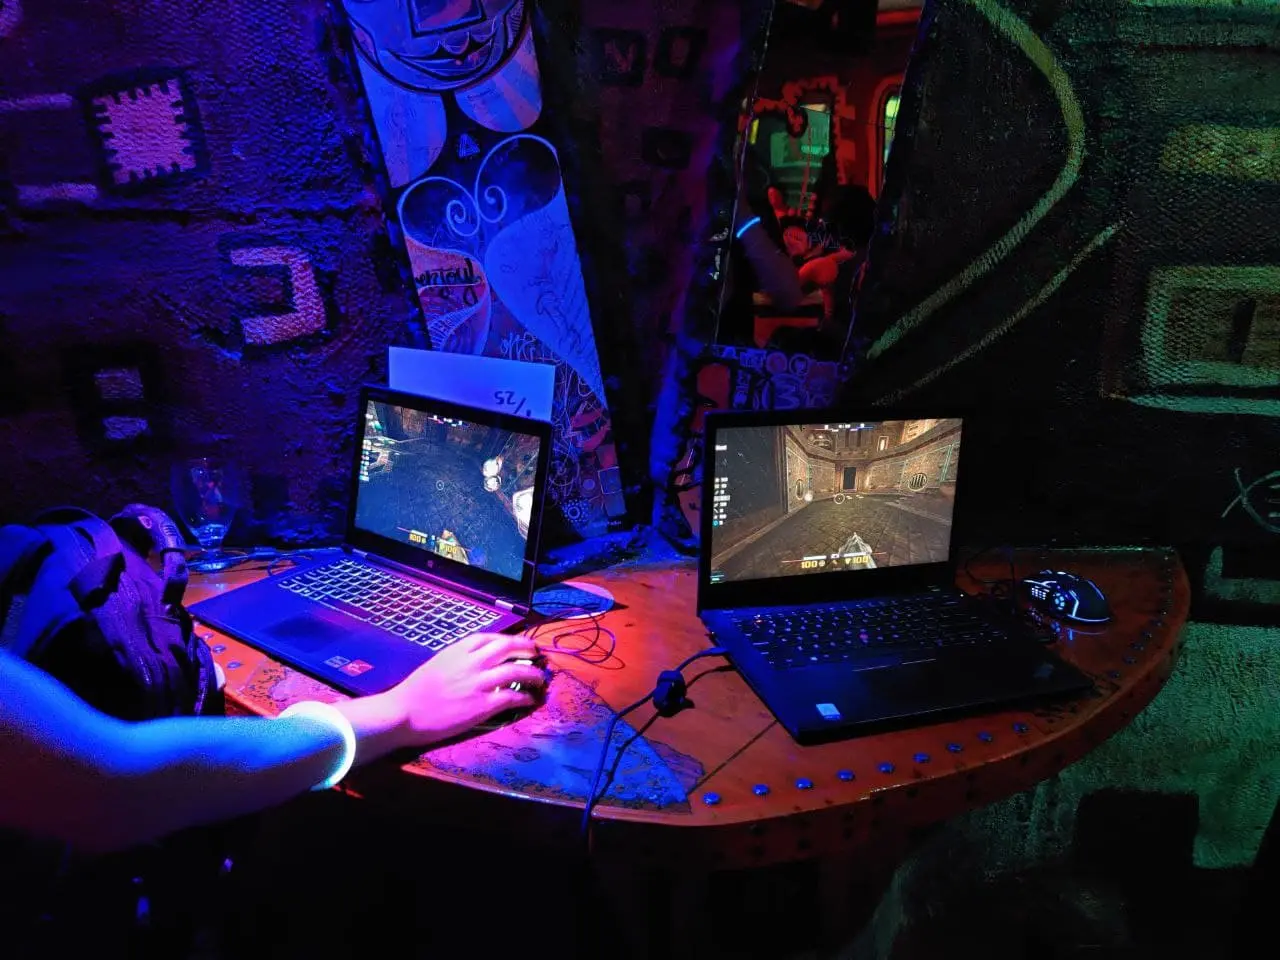 Two laptops running Quake in an ultraviolet themed night club.